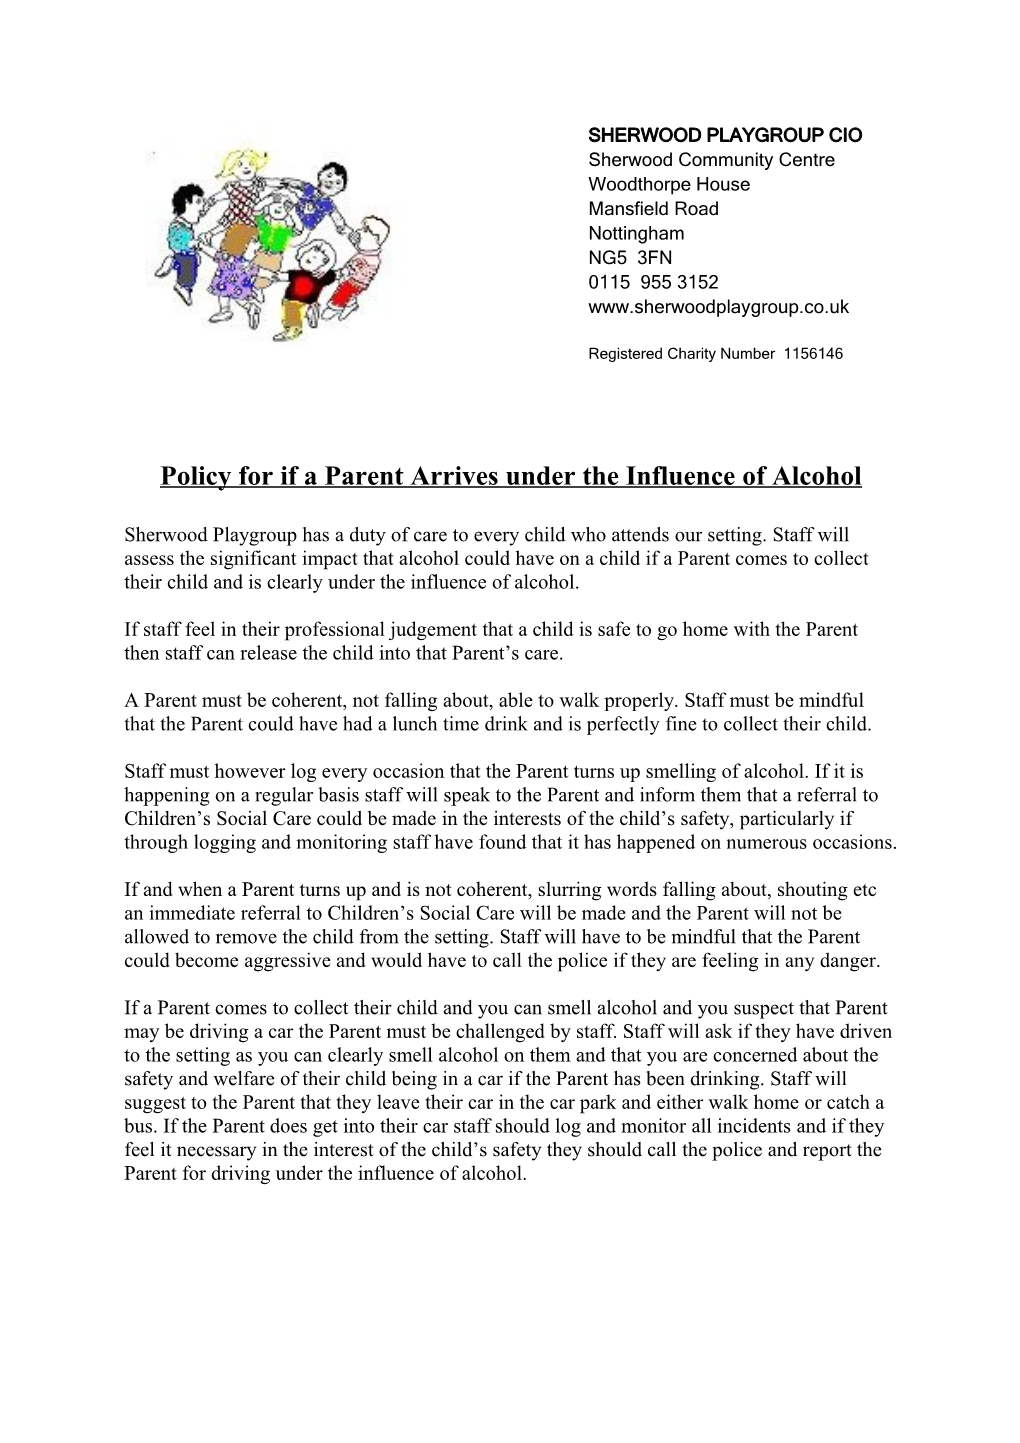 Policy for If a Parent Arrives Under the Influence of Alcohol